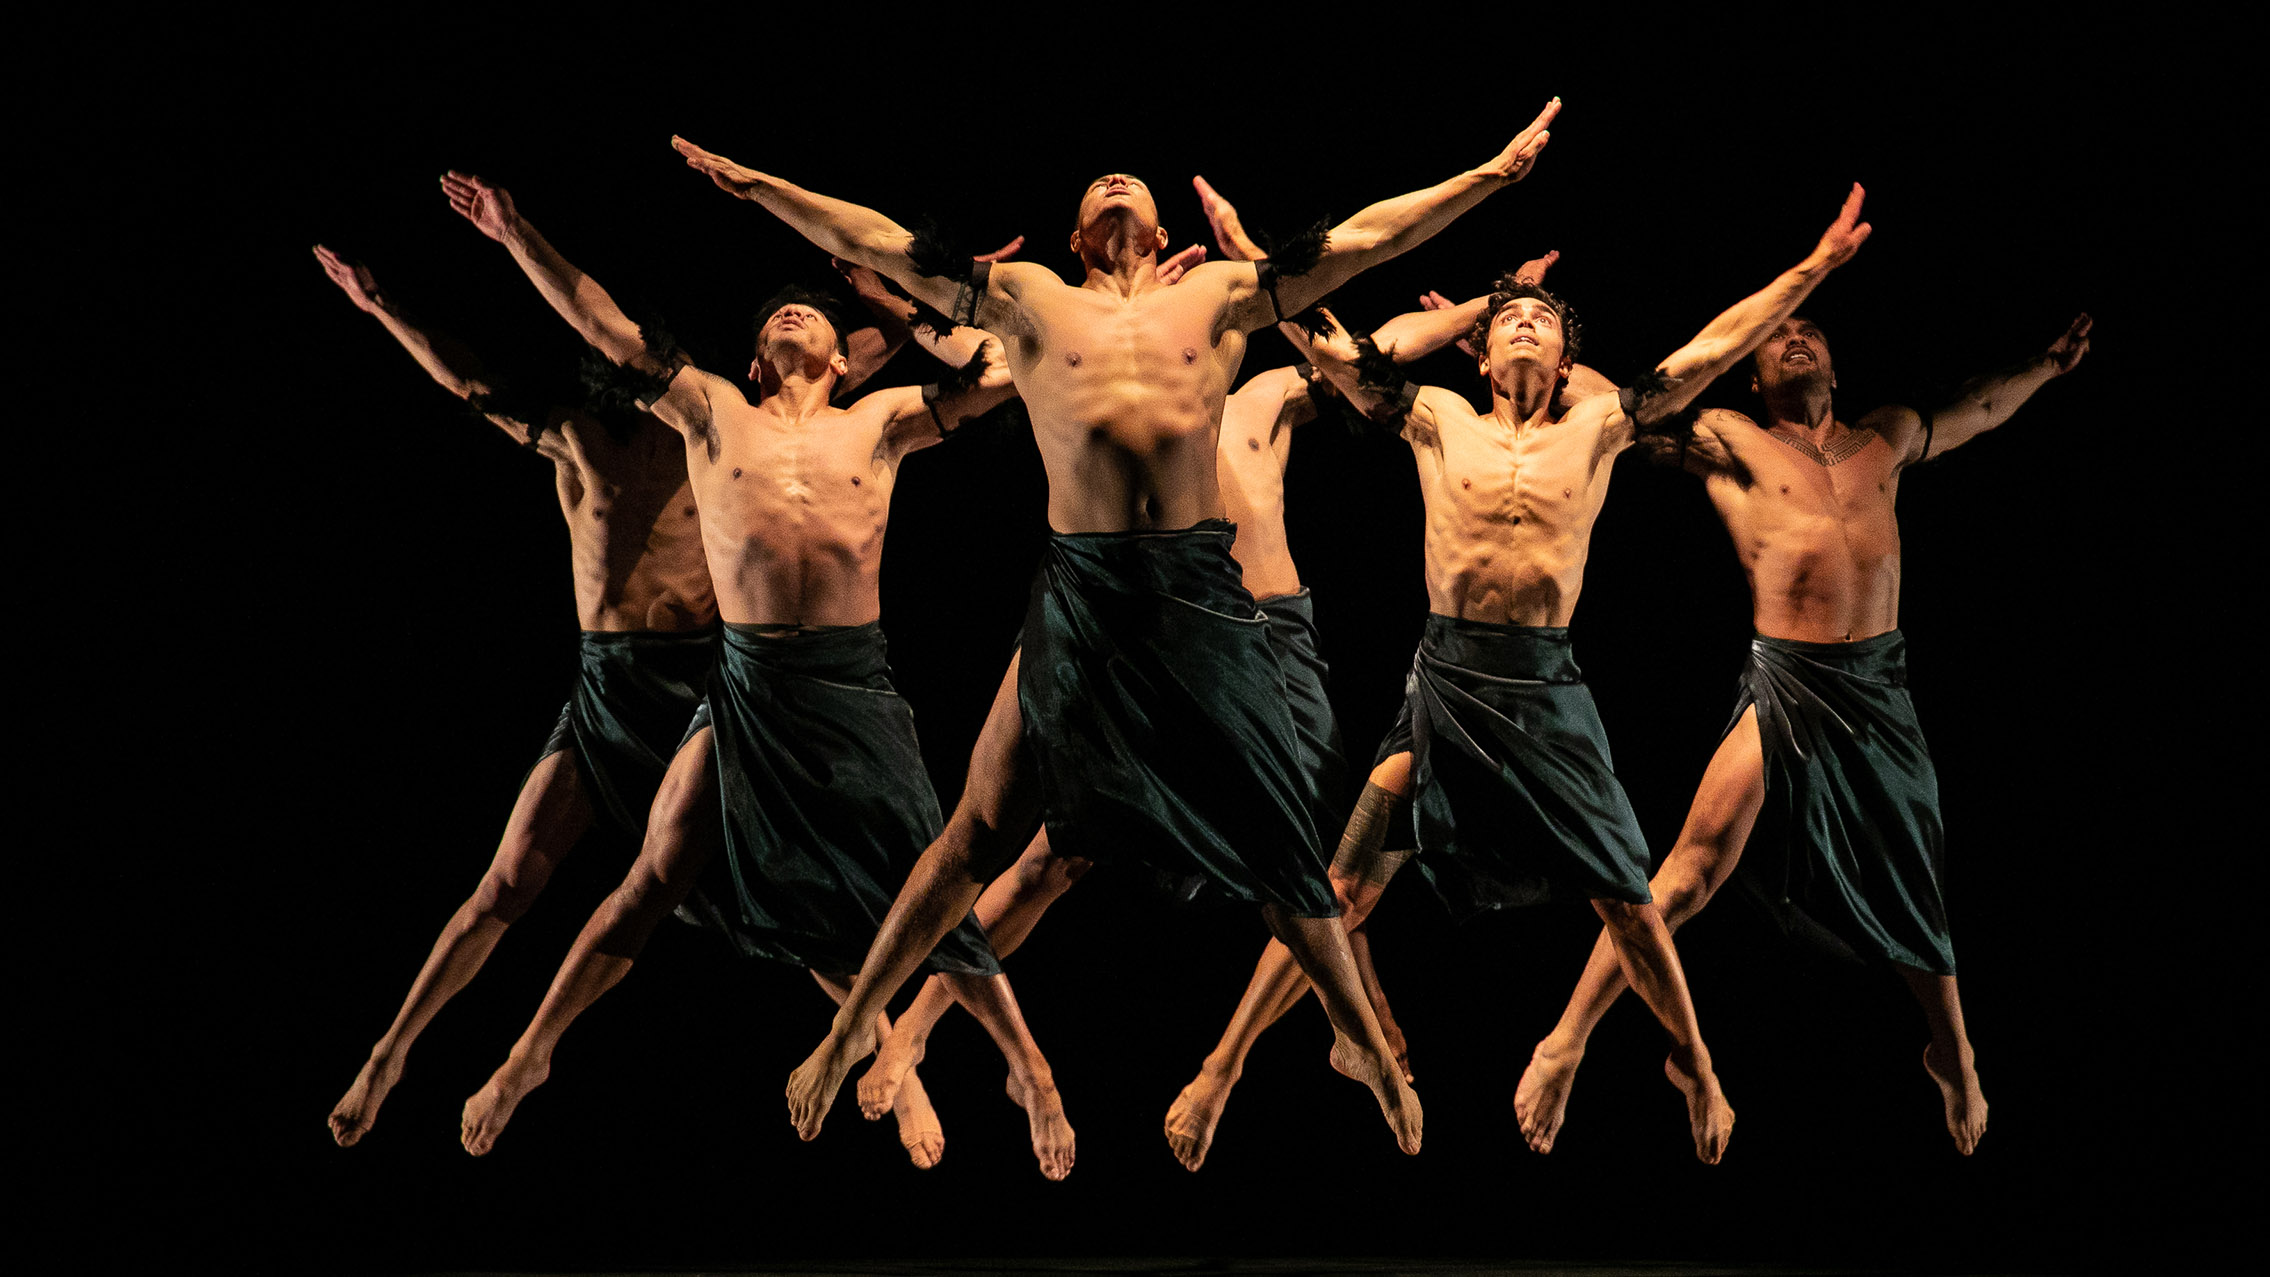 A group of male presenting dancers leap in the air against a black backdrop.